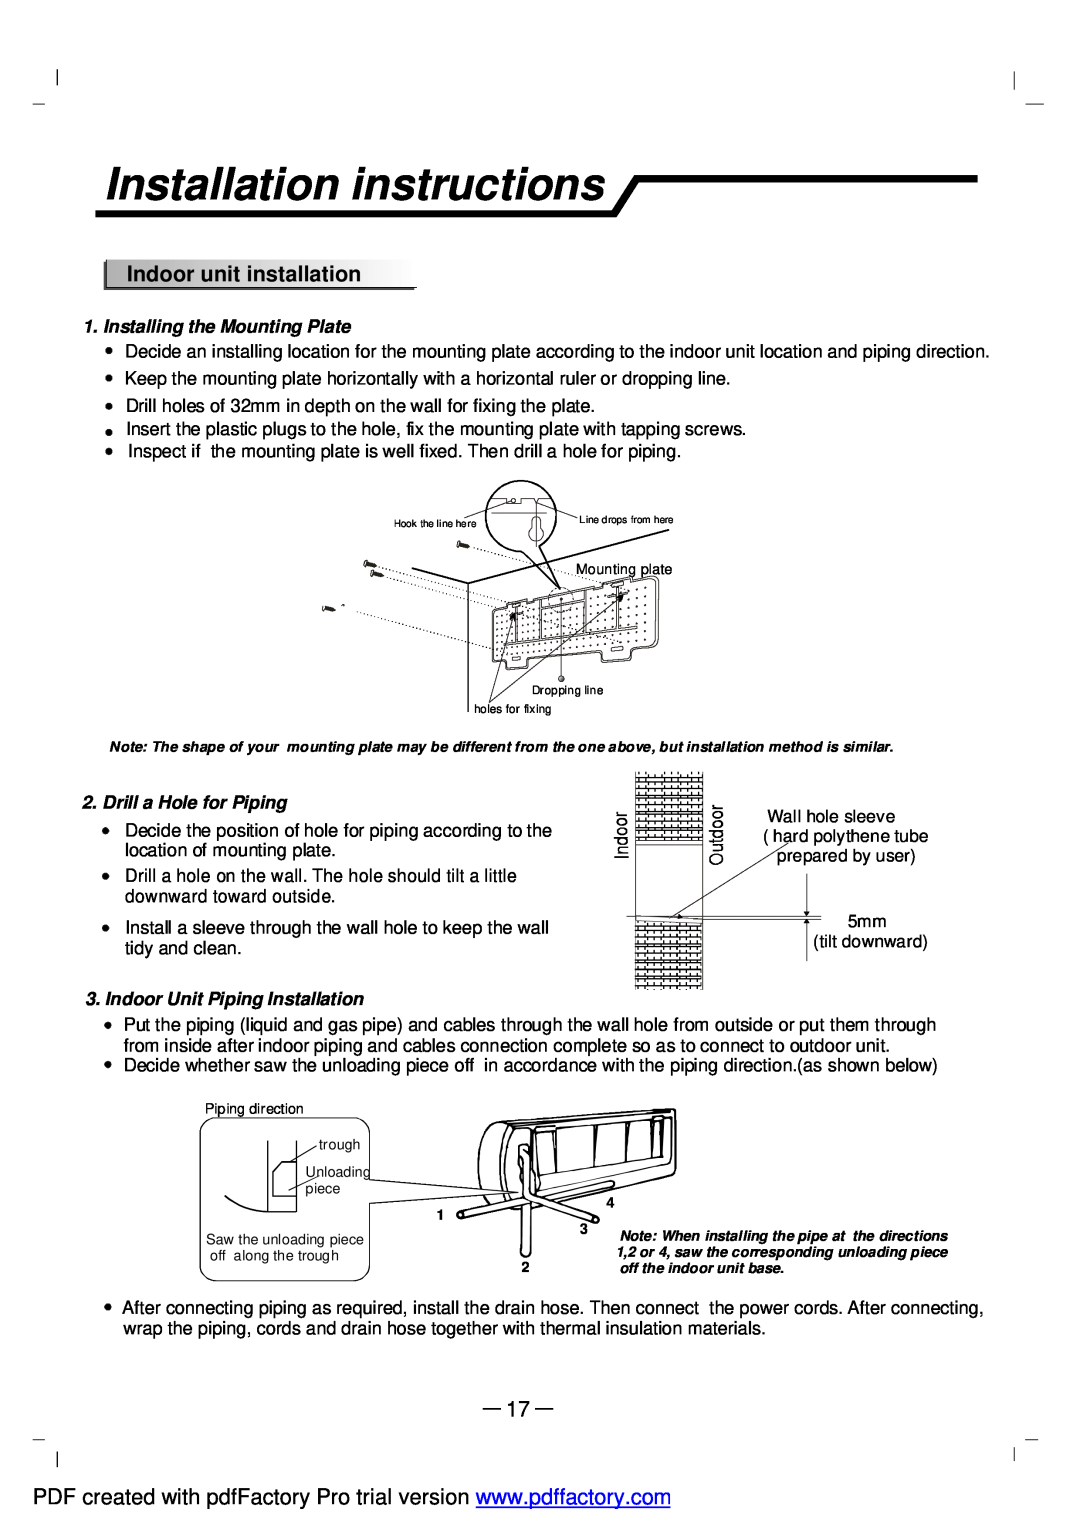 NEC RIH-2667 Installation instructions, Indoorunitinstallation, Installing the Mounting Plate, Drill a Hole for Piping 